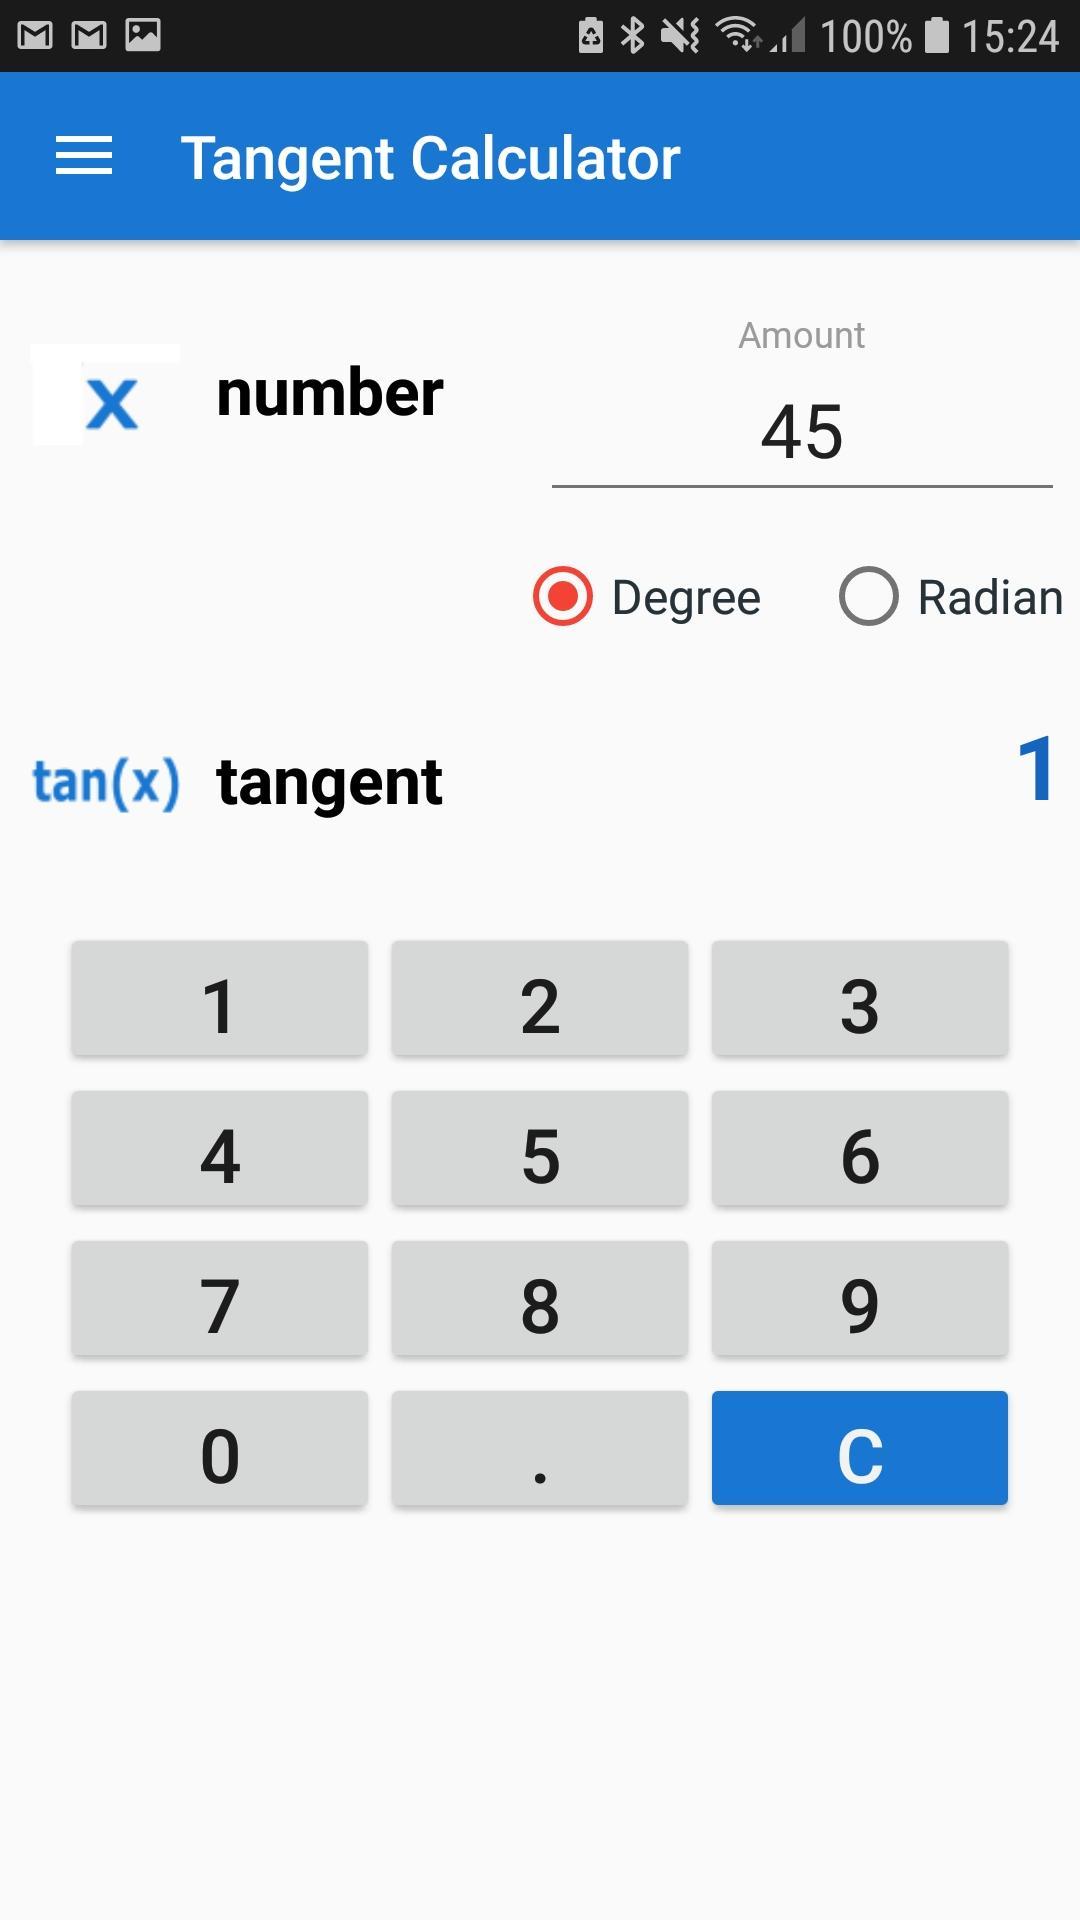 Tangent Calculator for Android - APK Download